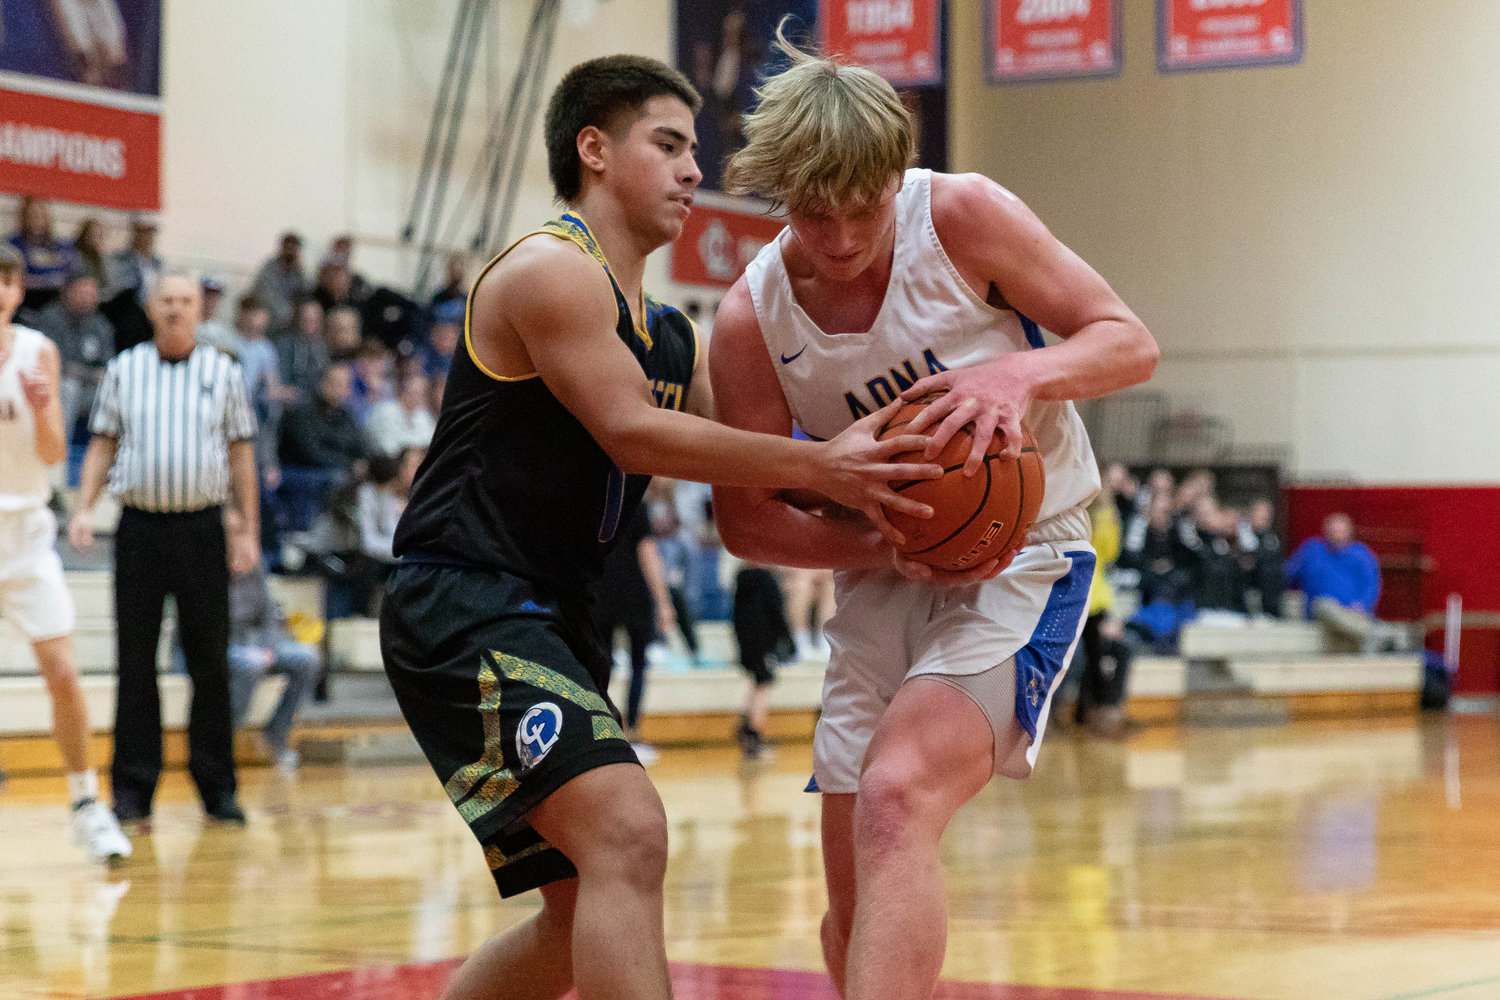 Adna forward Lane Johnson grapples for possession with a Chief Leschi defender Jan. 16 at the MLK Classic at Lower Columbia College in Longview.